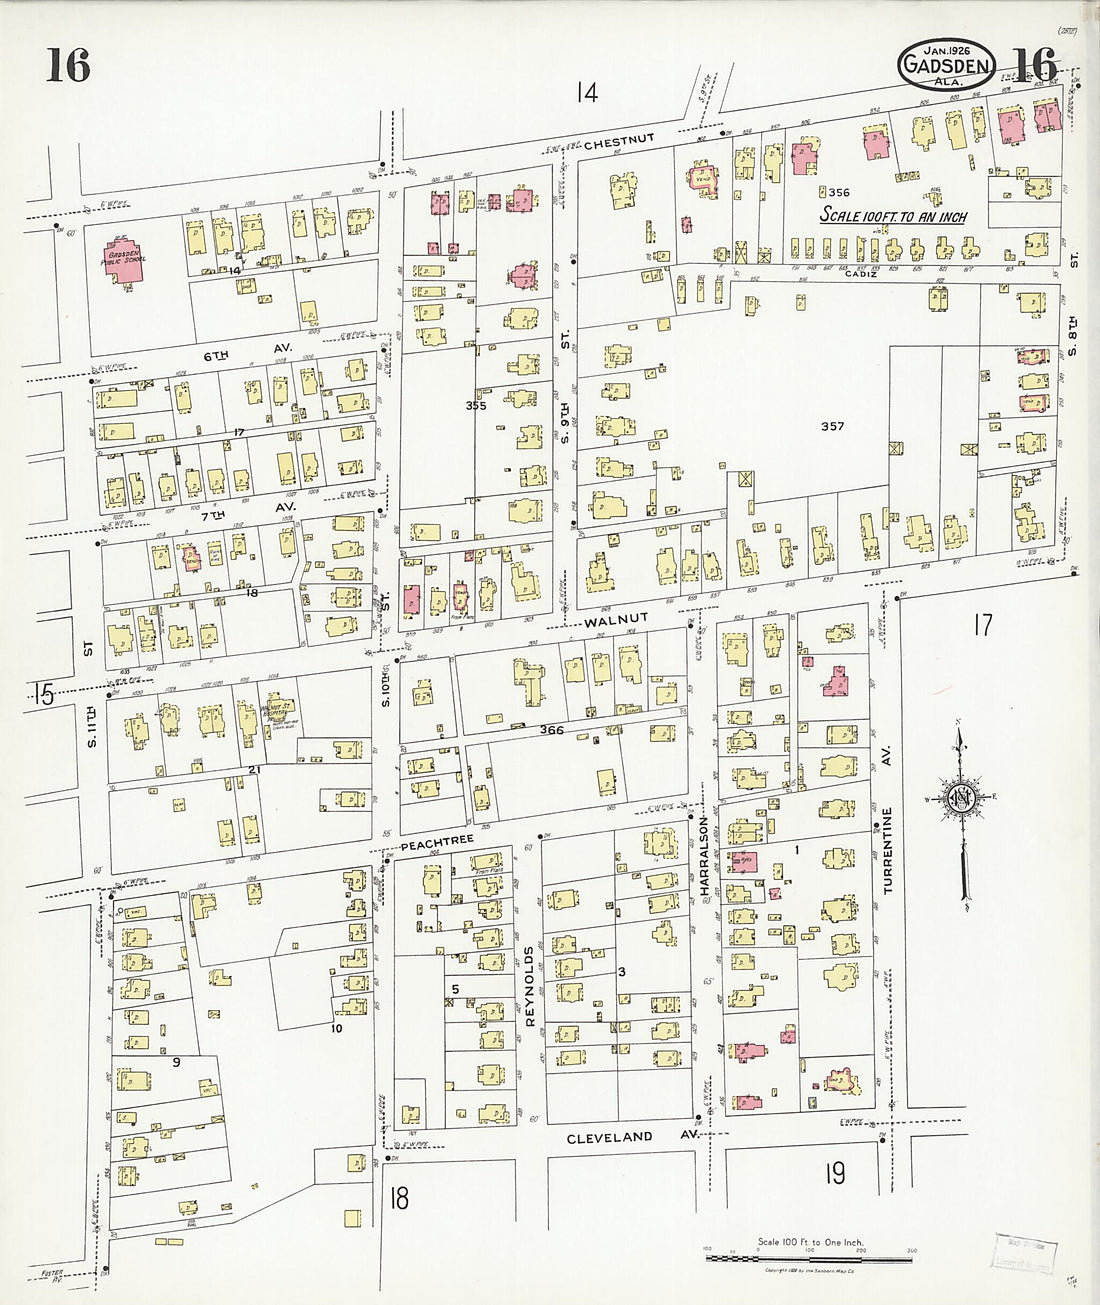 This old map of Gadsden, Etowah County, Alabama was created by Sanborn Map Company in 1926